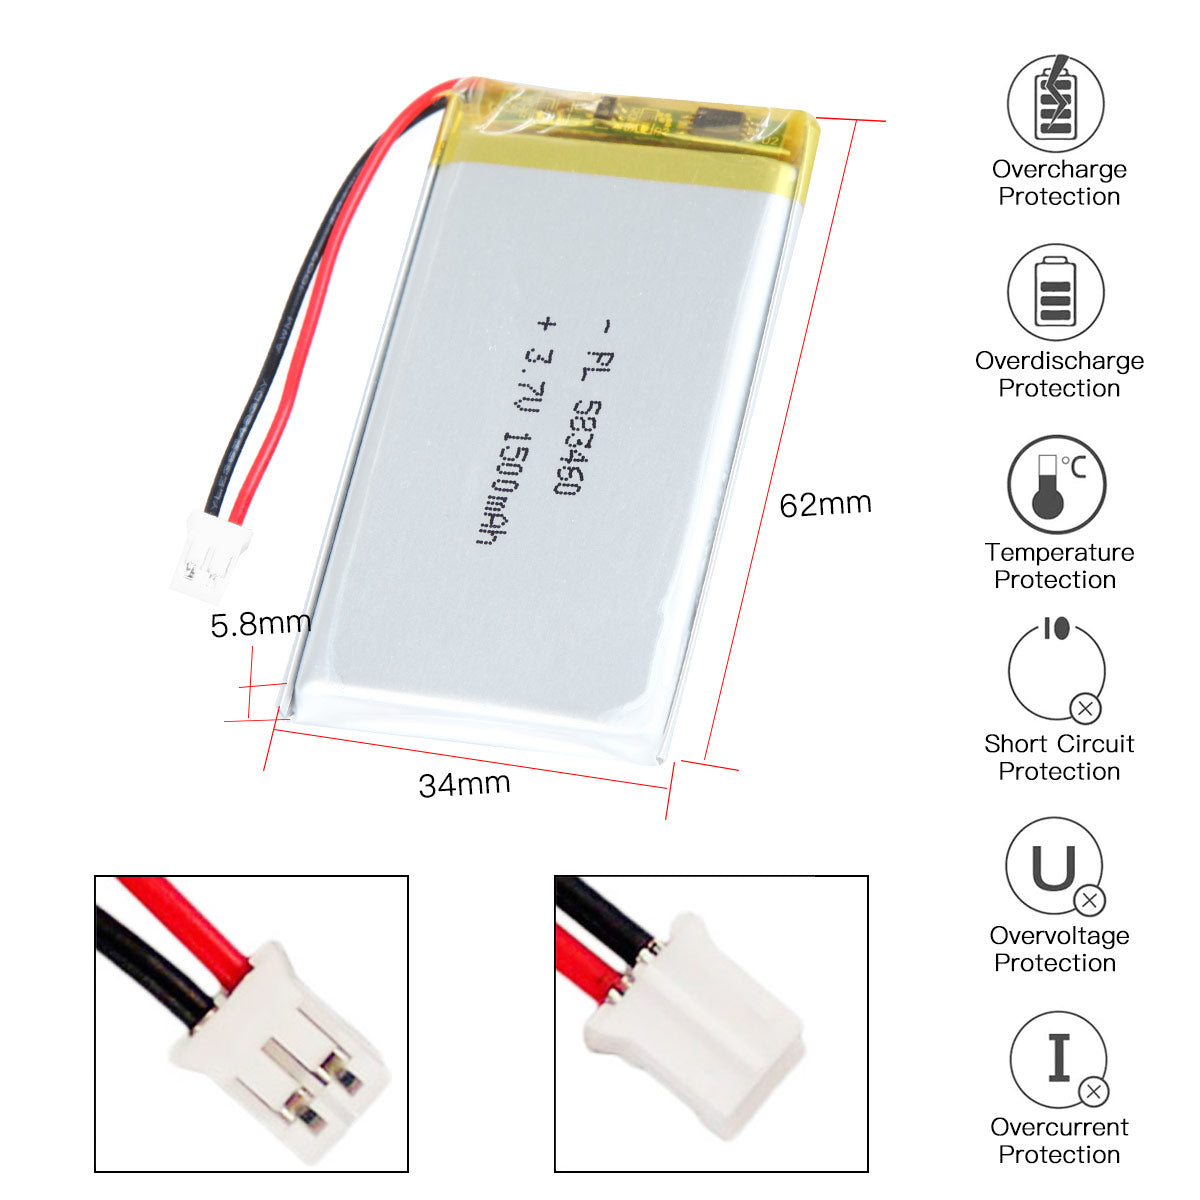 YDL 3.7V 1500mAh 583460 Rechargeable  Lithium Polymer Battery